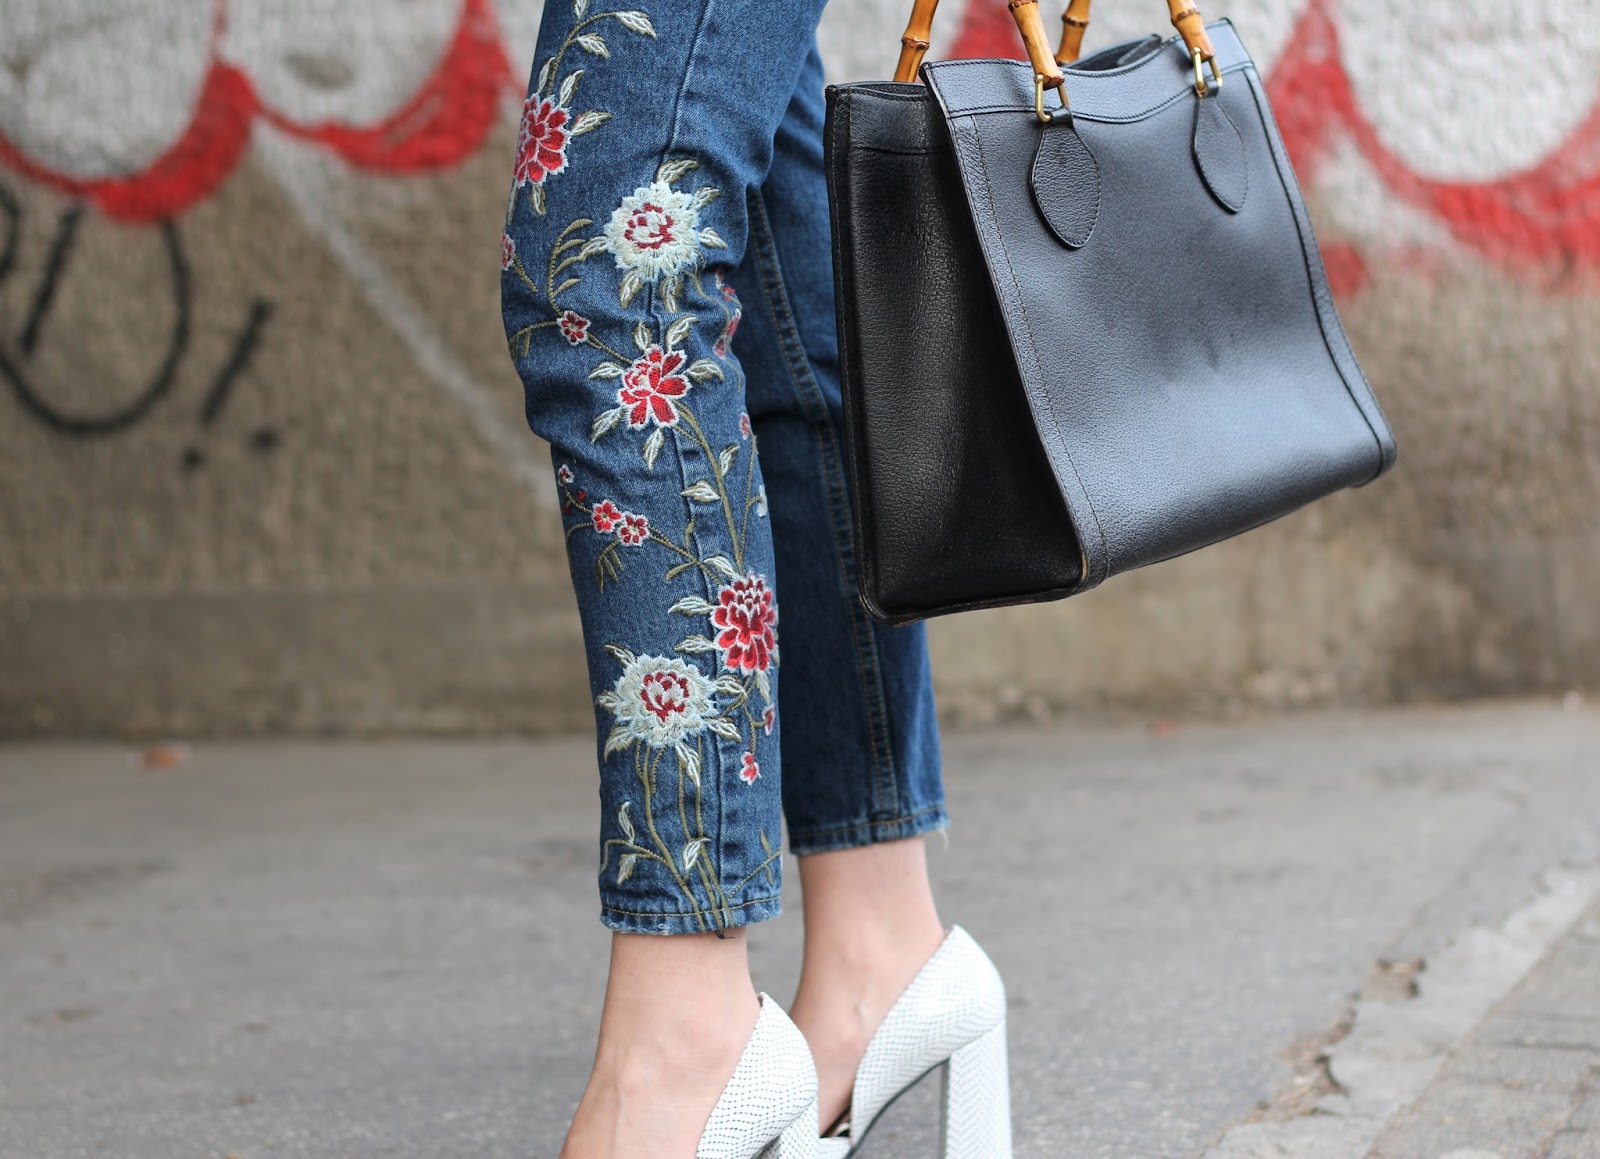 Embroidered jeans | BEAUTY FINE PRINT